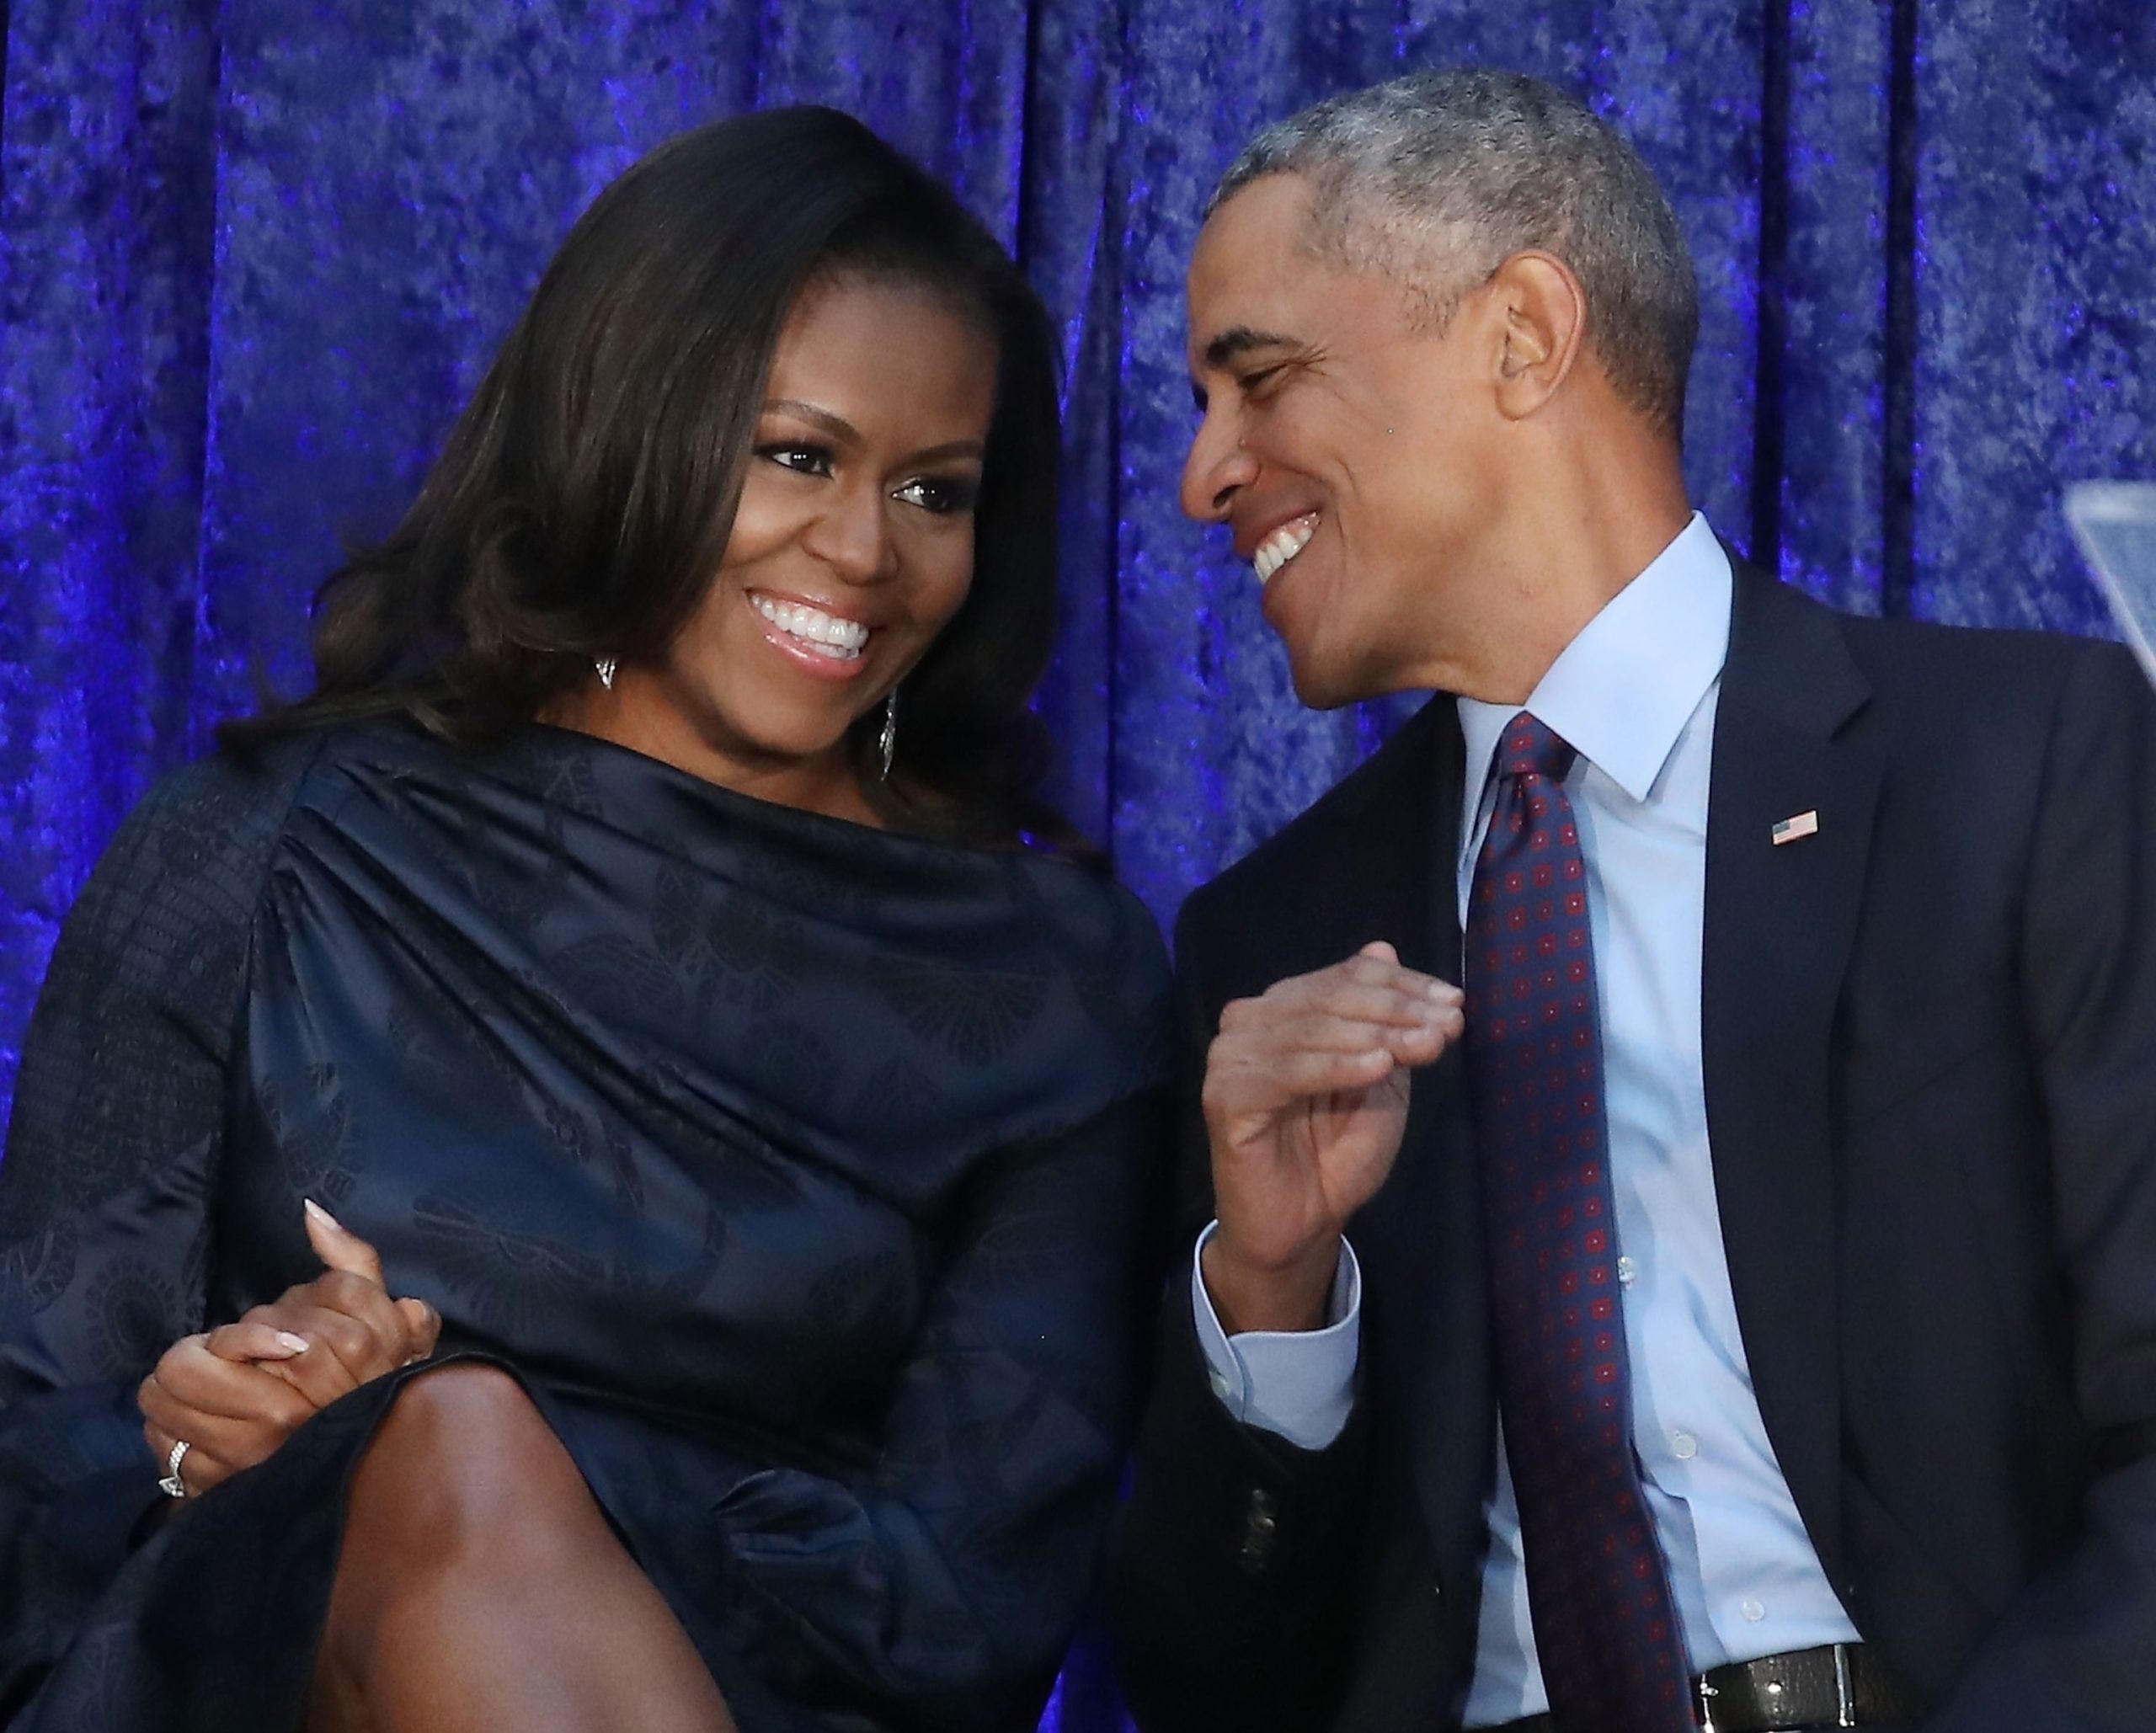 Michelle Obama Advises Daughters to Steer Clear of Politics, According to Barack Obama